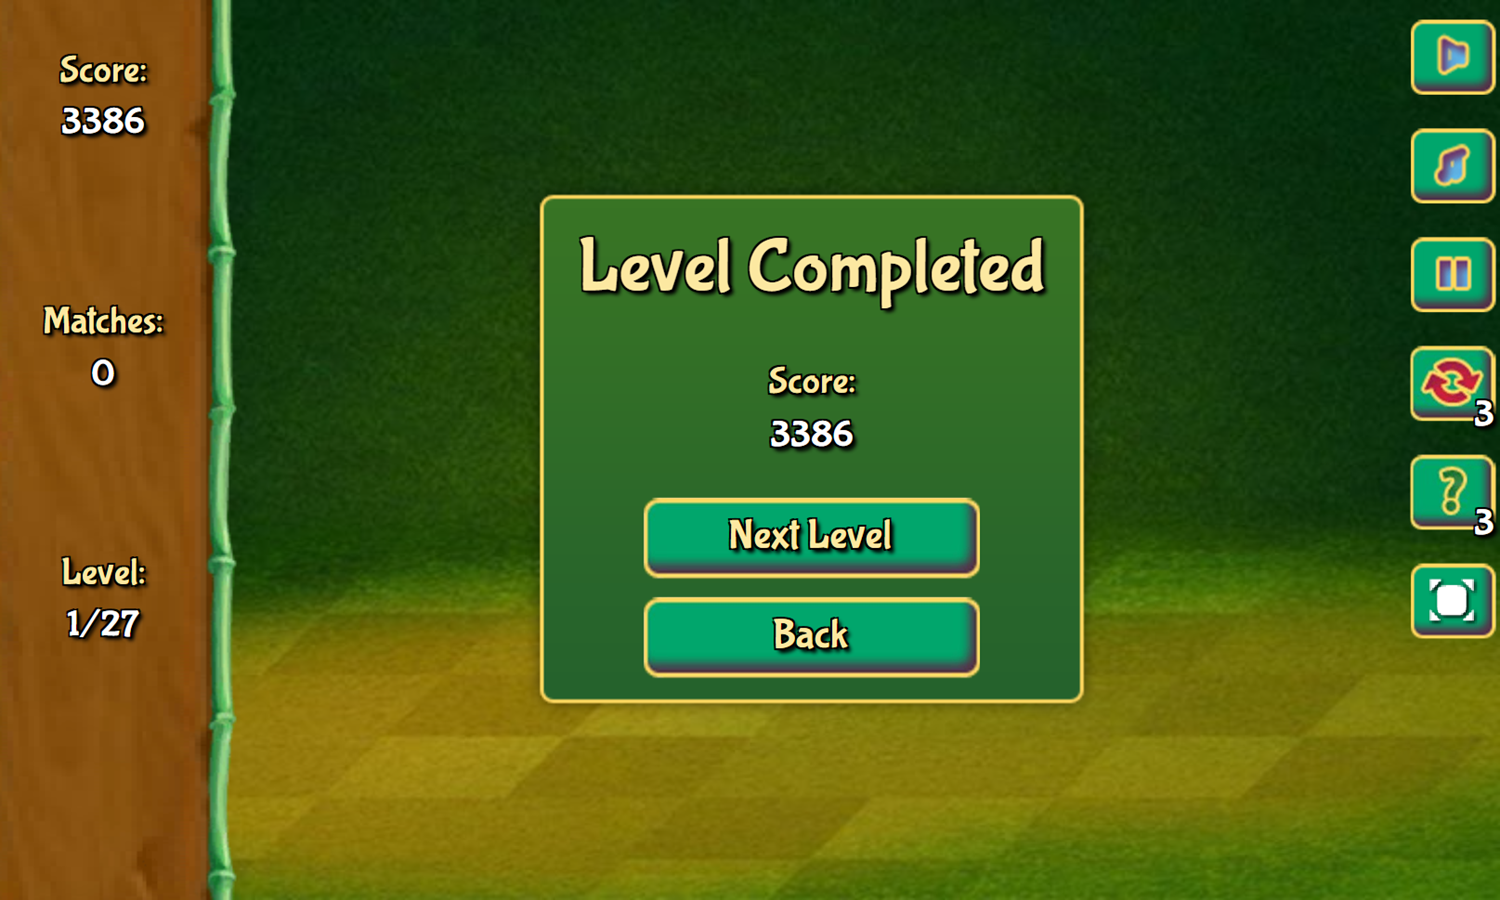 Jolly Jong 2 Game Level Completed Screenshot.